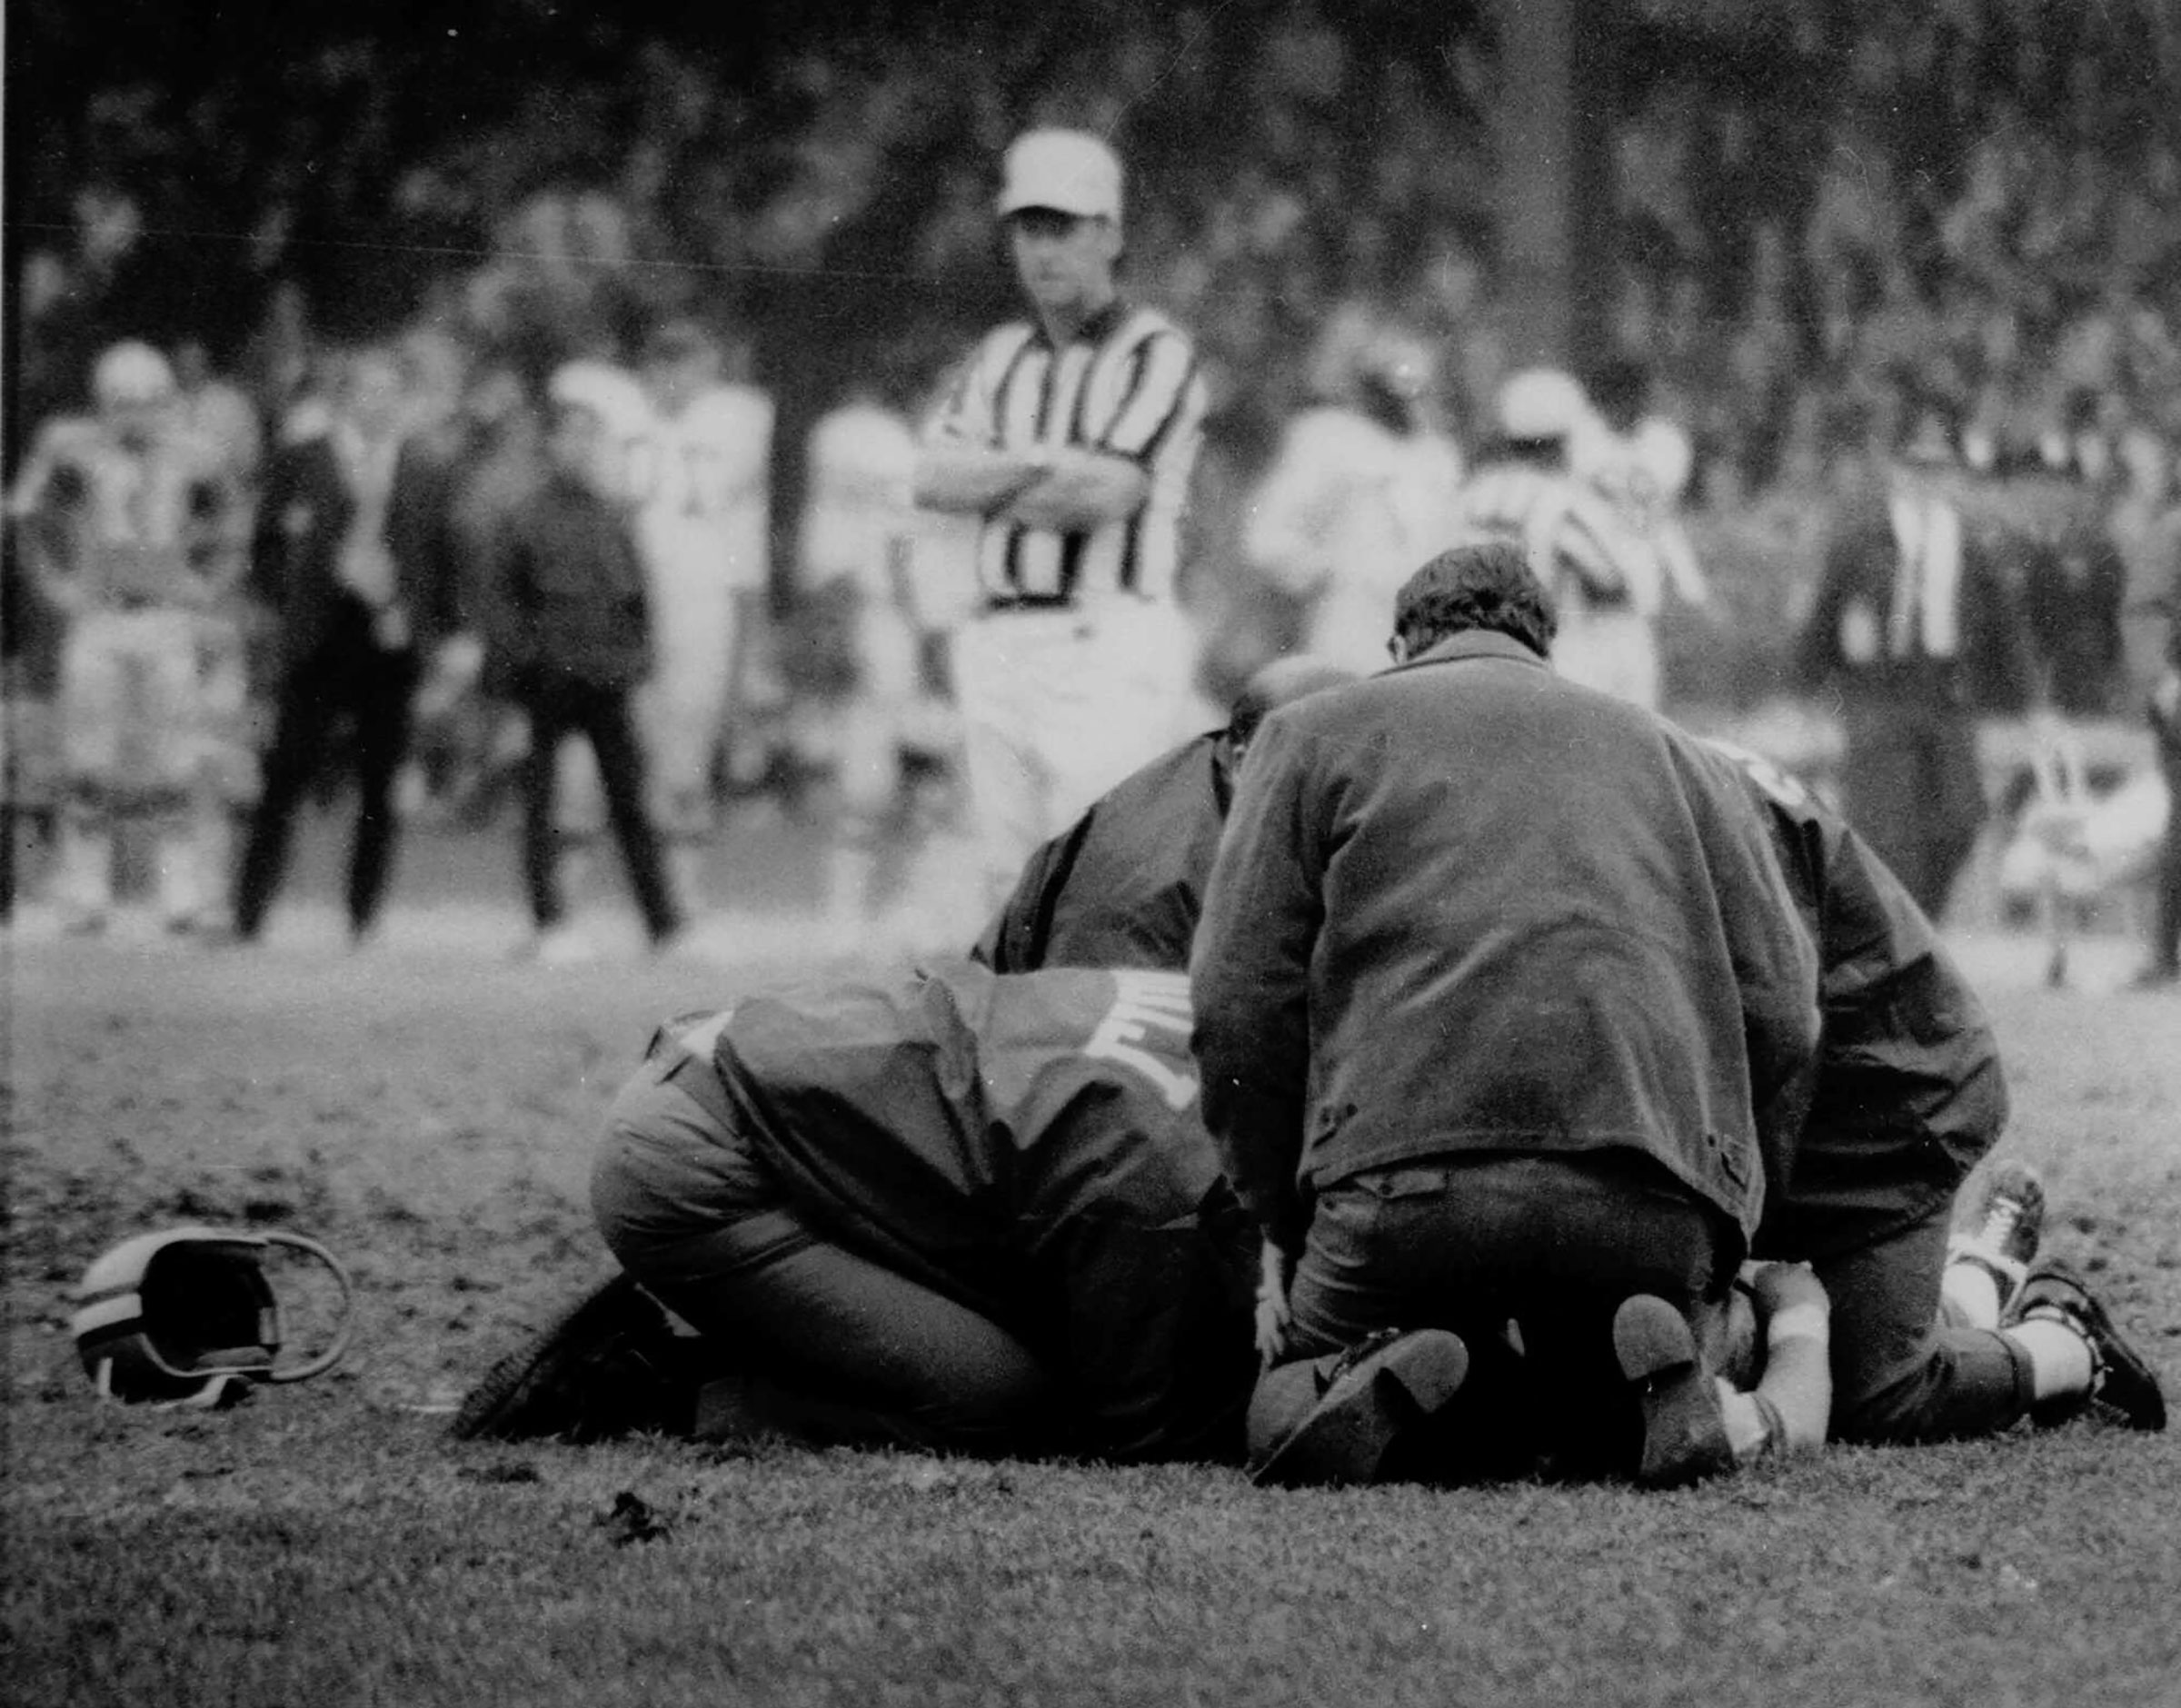 Team doctor Edwin Gis, right, attends to Chuck Hughes shortly after he collapsed during a game between the Detroit Lions and Chicago Bears on Oct. 25, 1971. Hughes died later in a Detroit hospital. (AP)